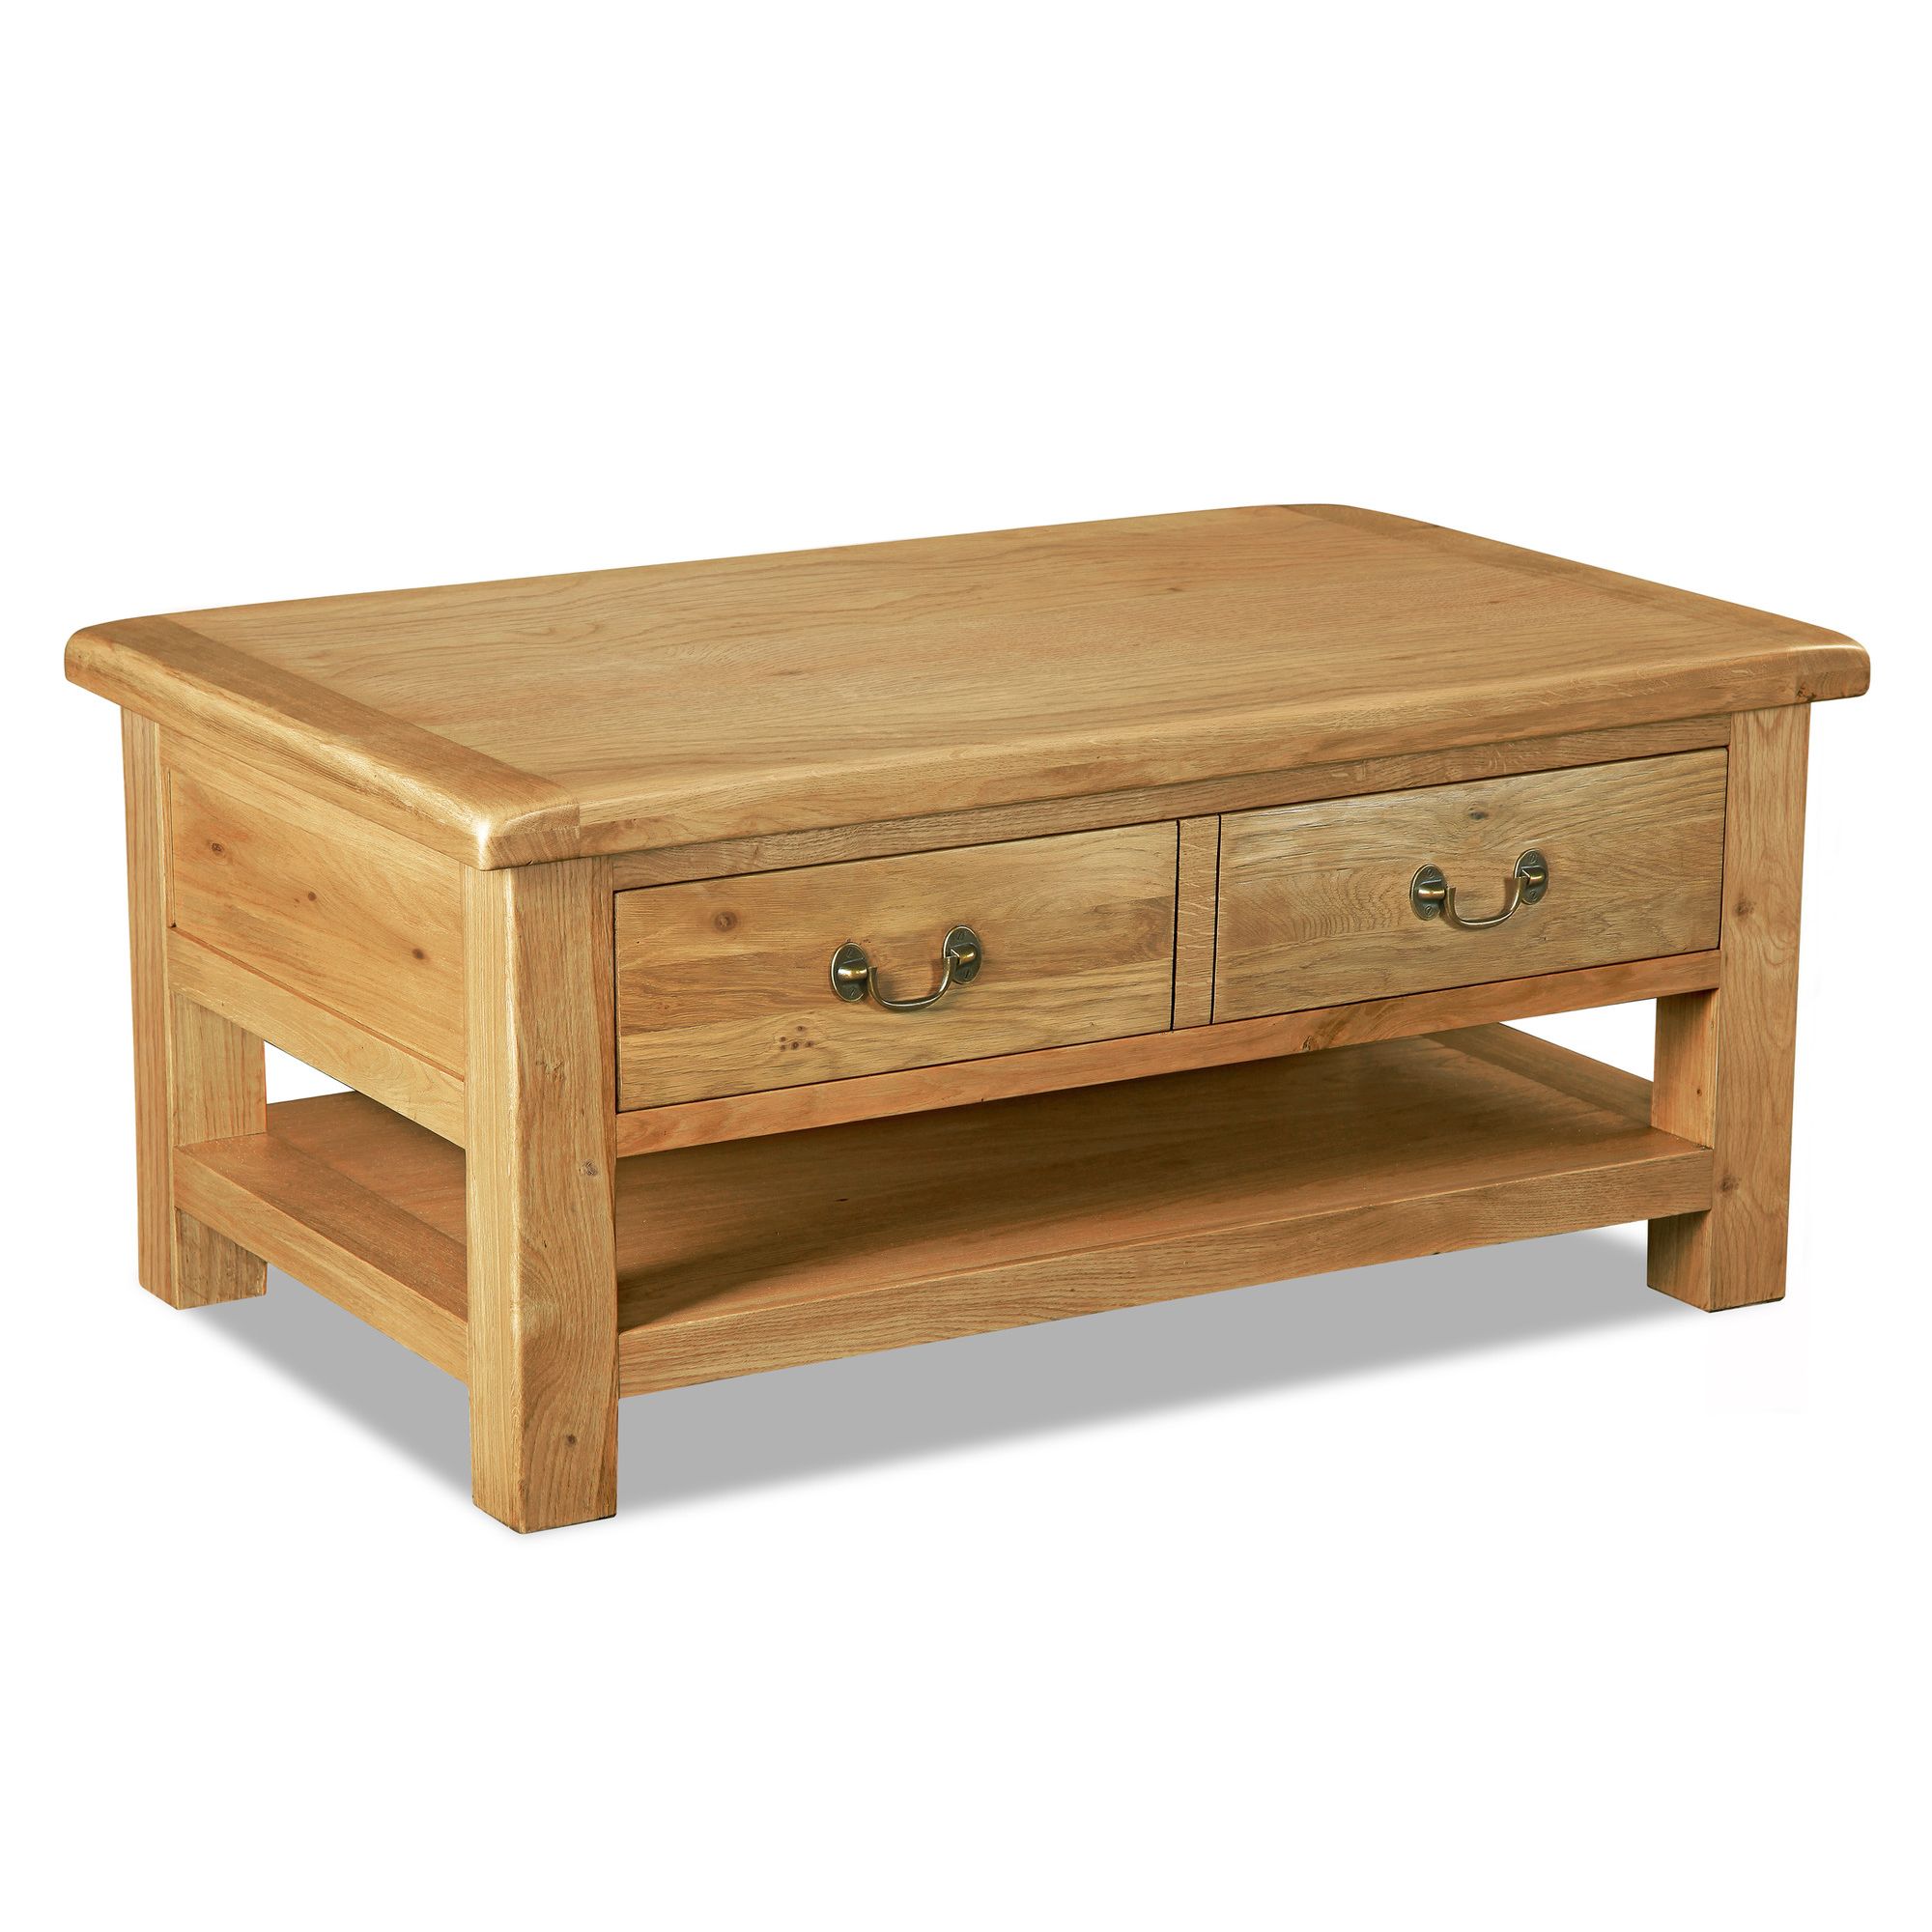 Alterton Furniture Amberley Coffee Table - Large at Tesco Direct